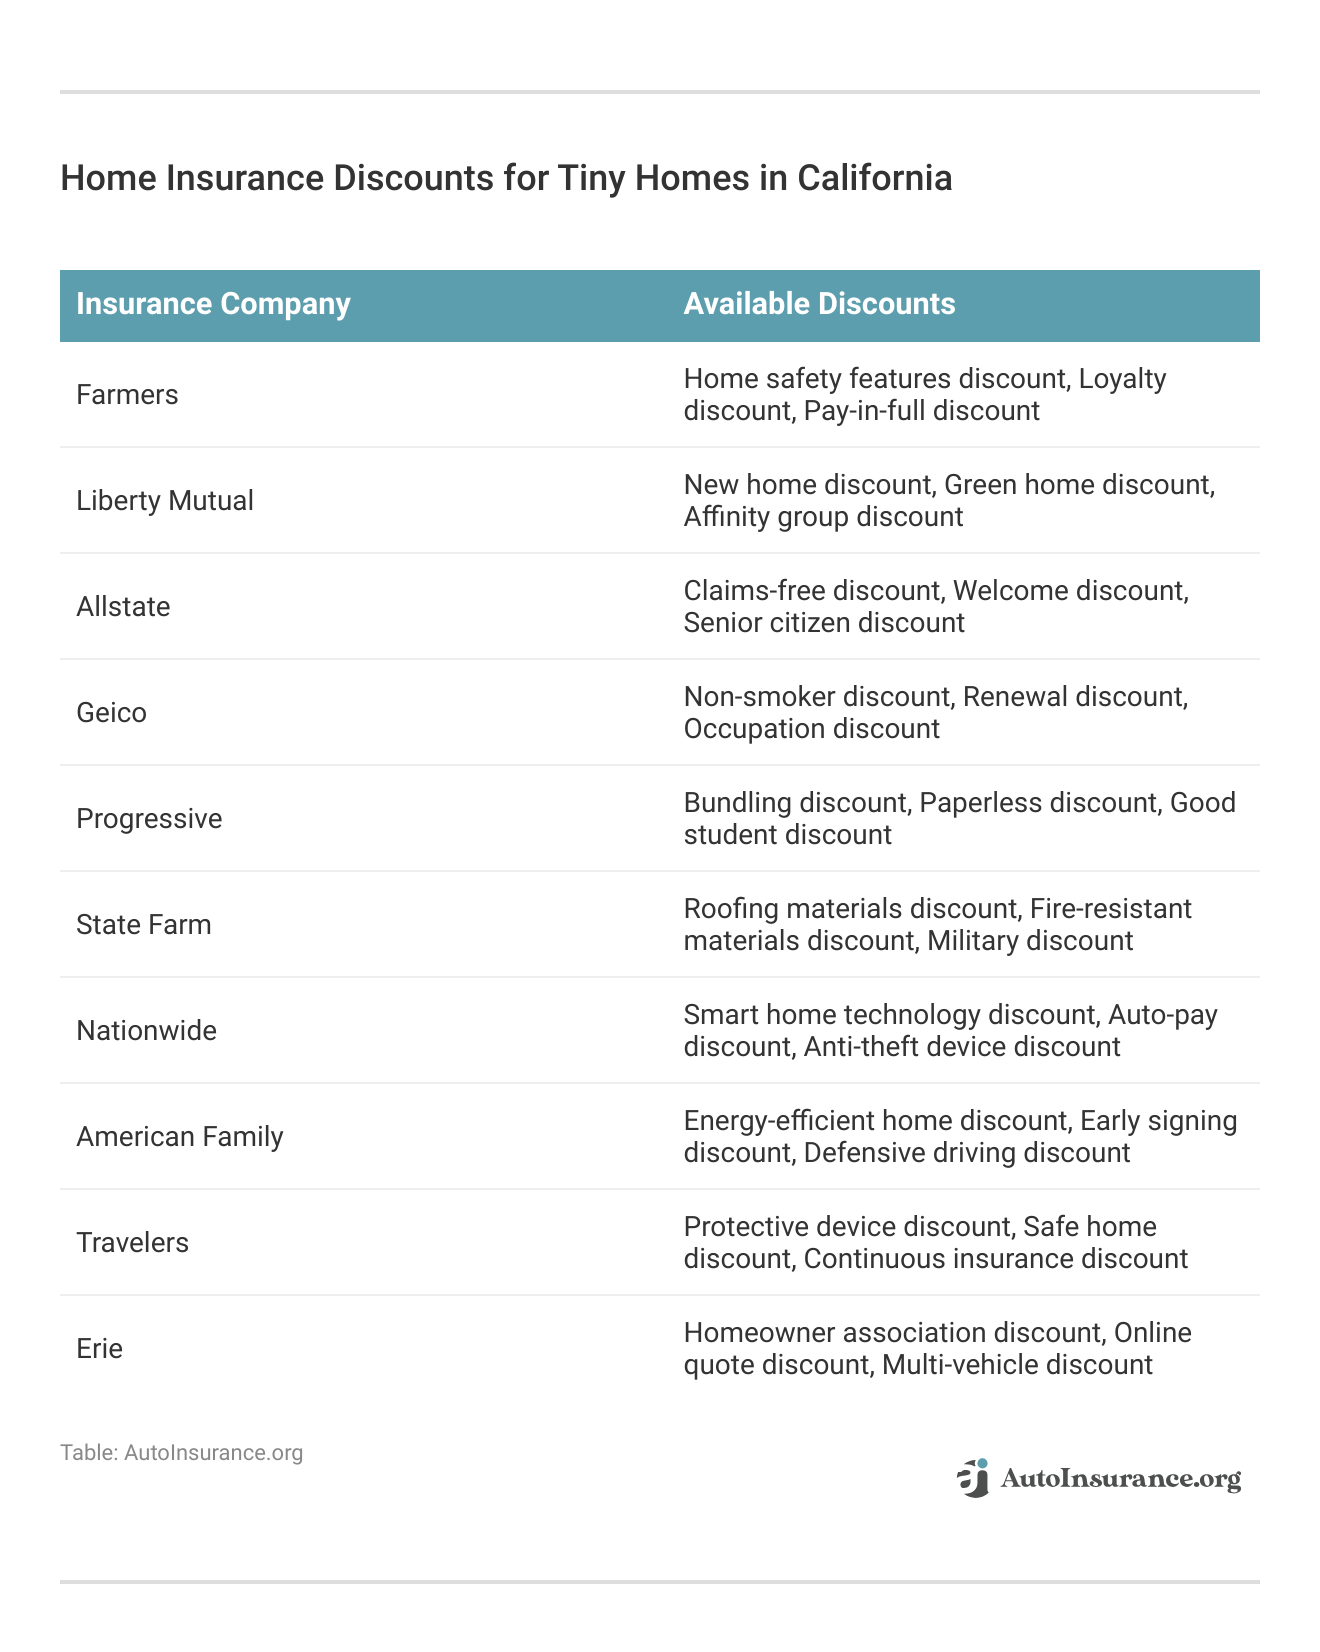 <h3>Home Insurance Discounts for Tiny Homes in California</h3>